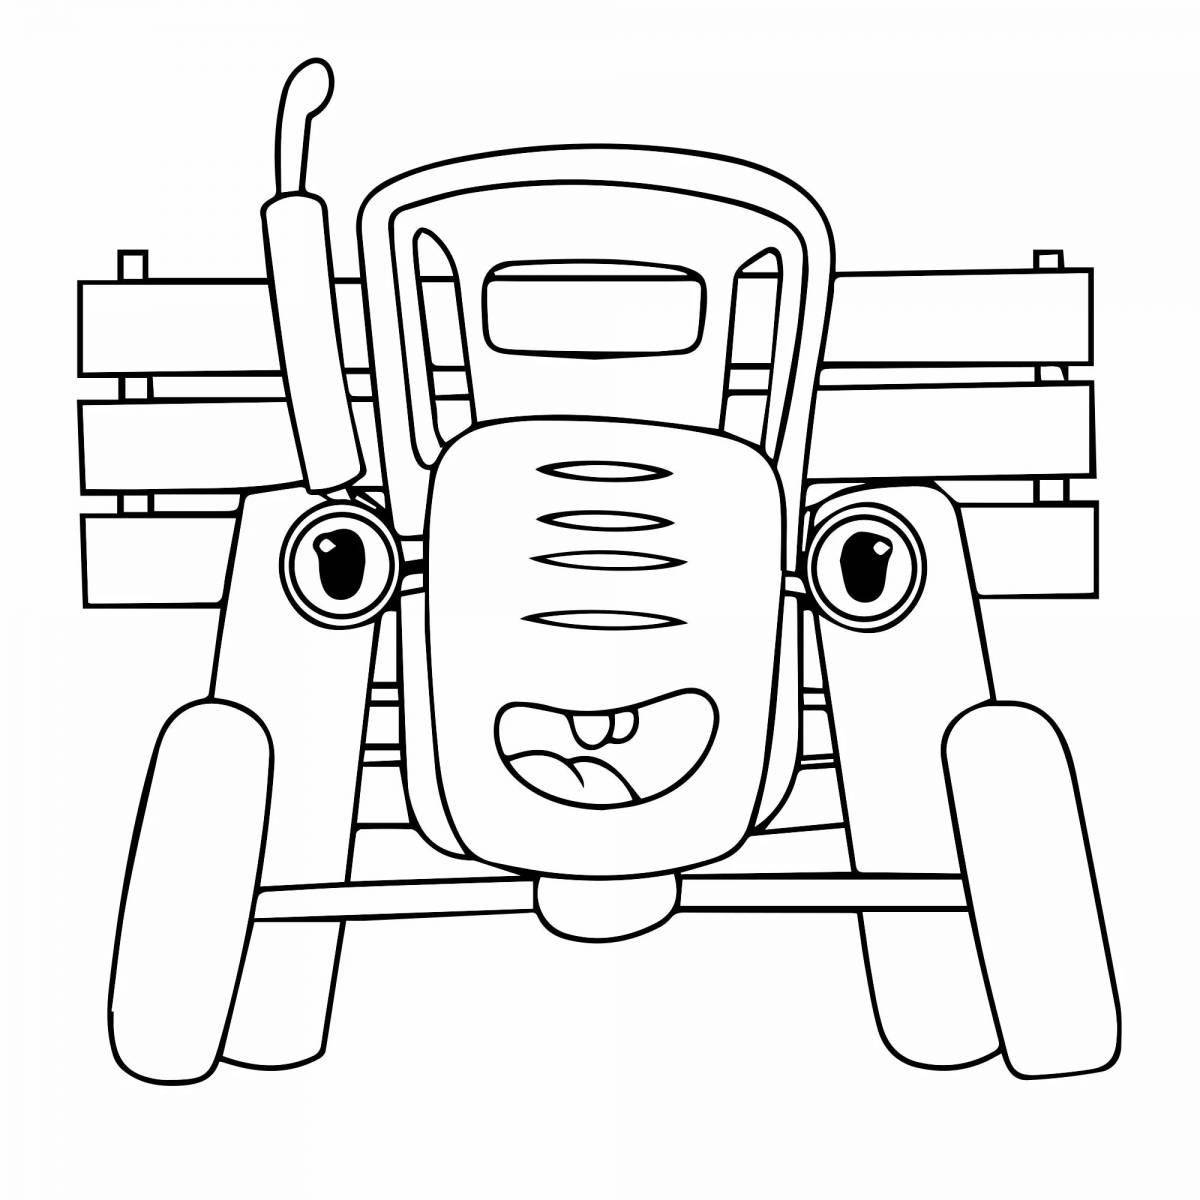 Flawless blue tractor coloring page